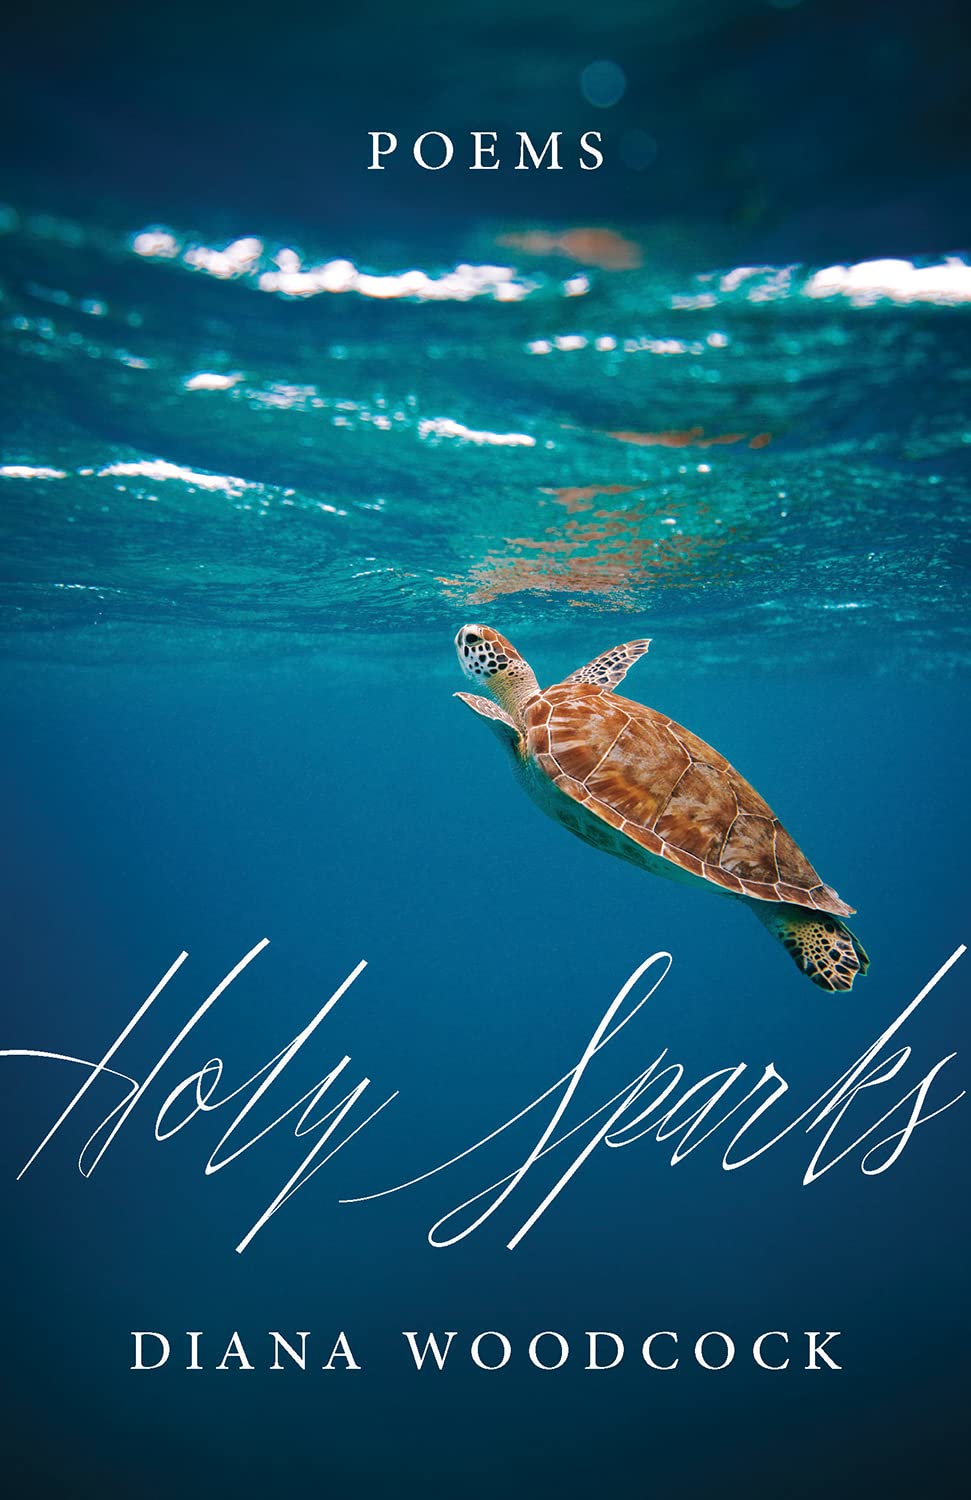 Book cover of HOLY SPARKS by Dr. Diana Woodcock features an sea turtle breaking the surface of the ocean.